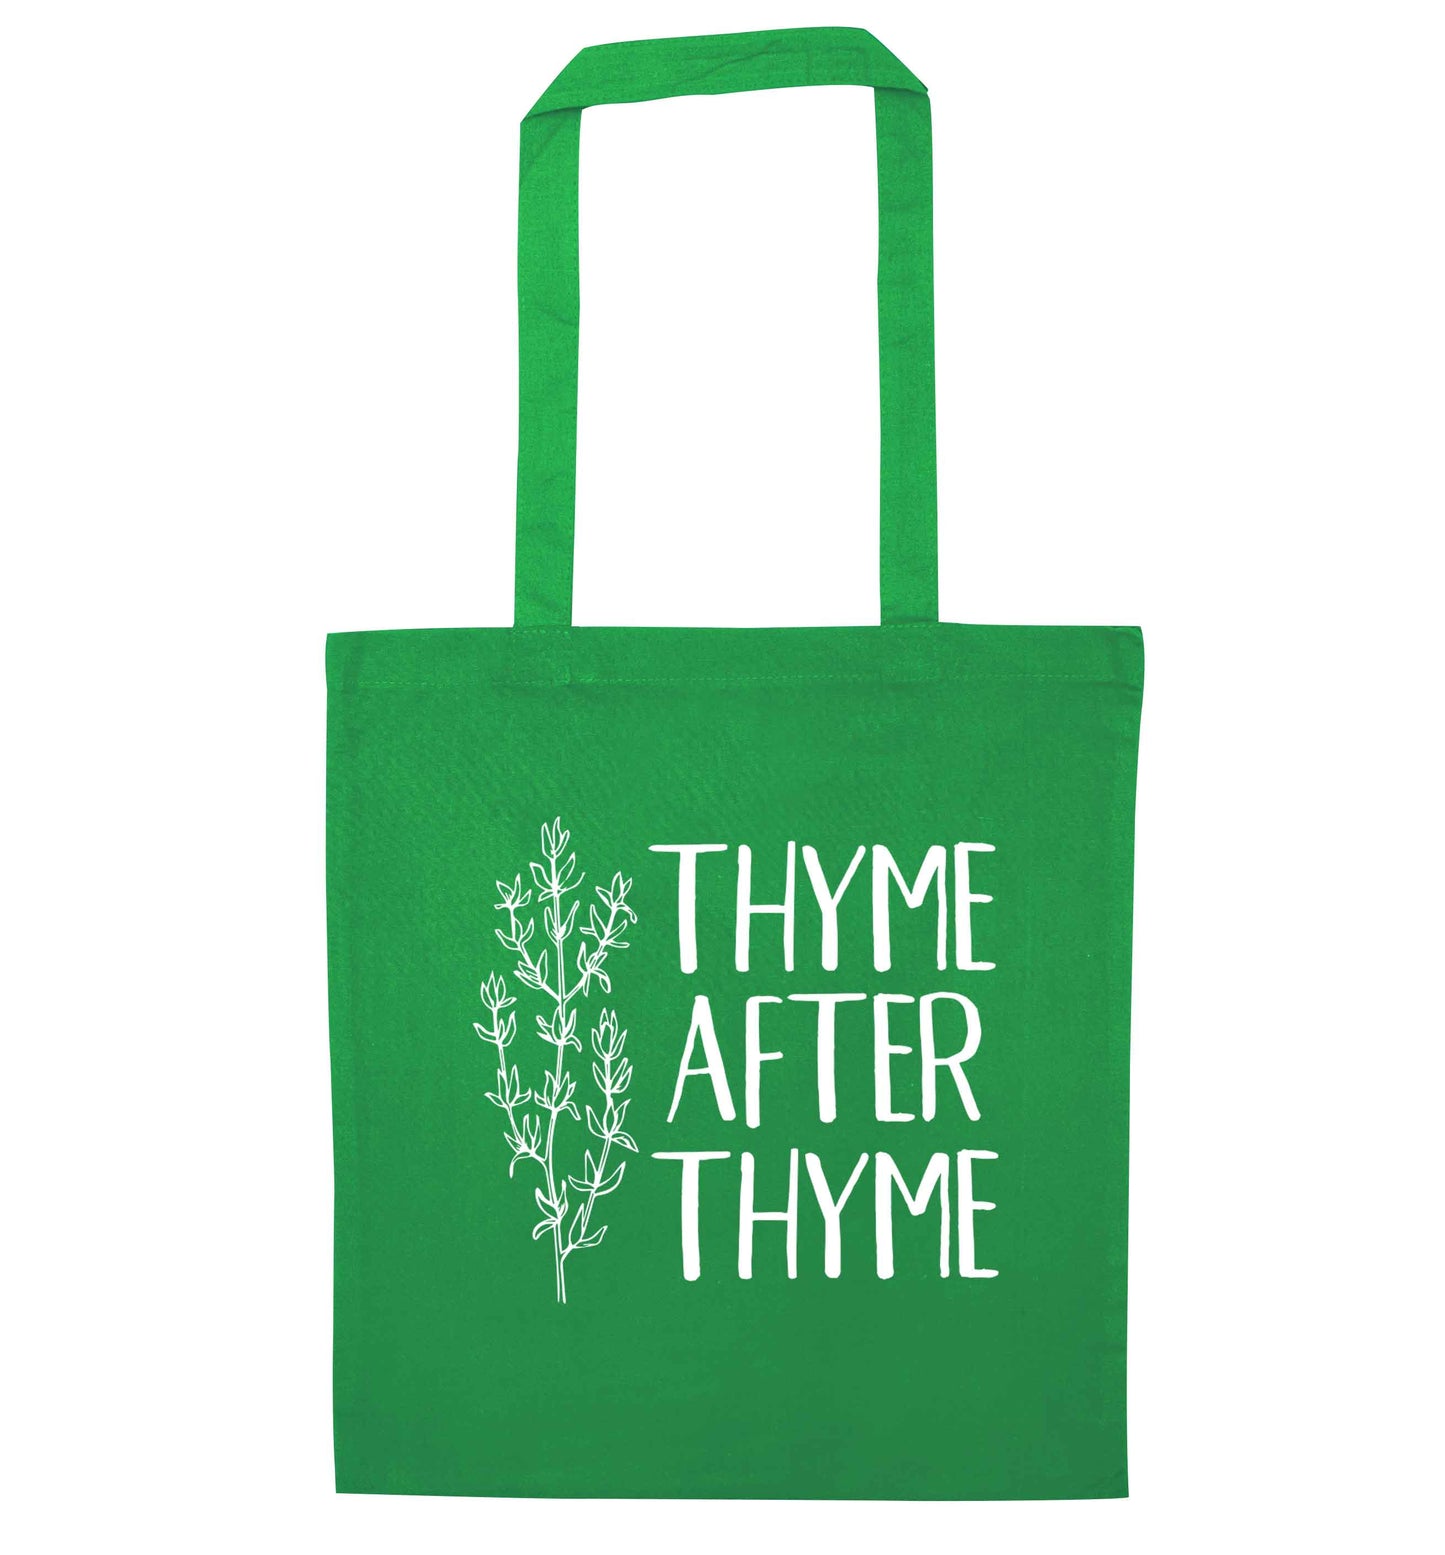 Thyme after thyme green tote bag